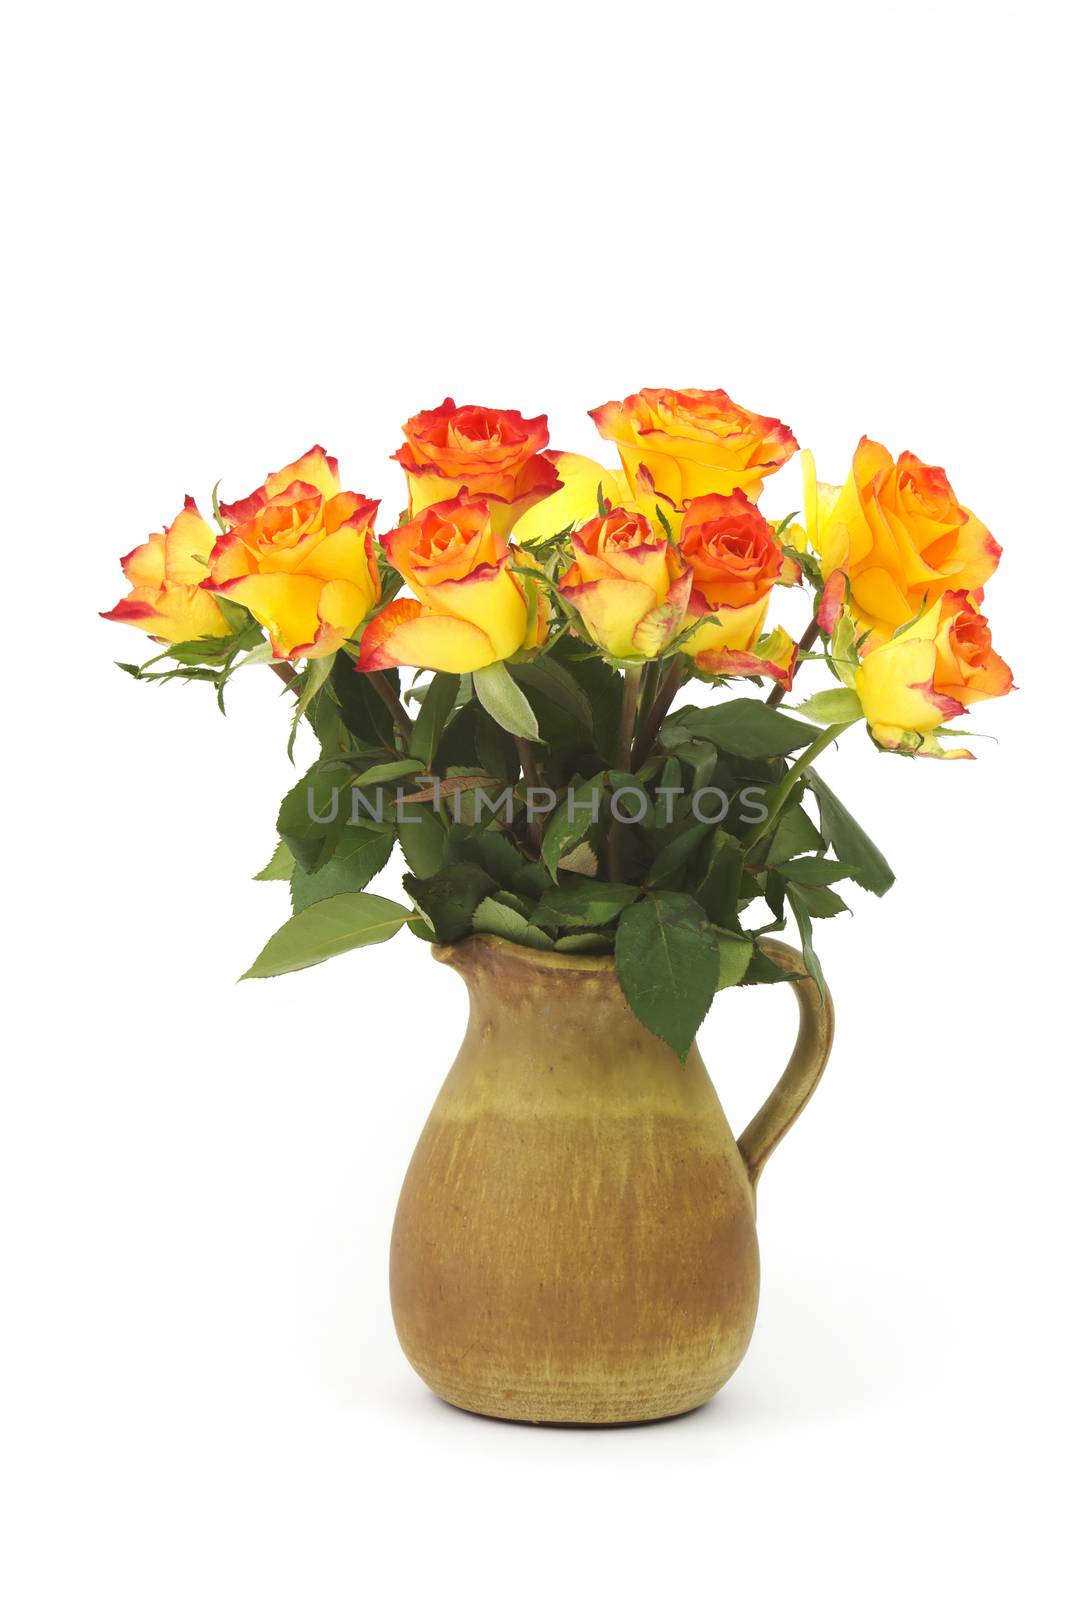 roses in a vase on white background